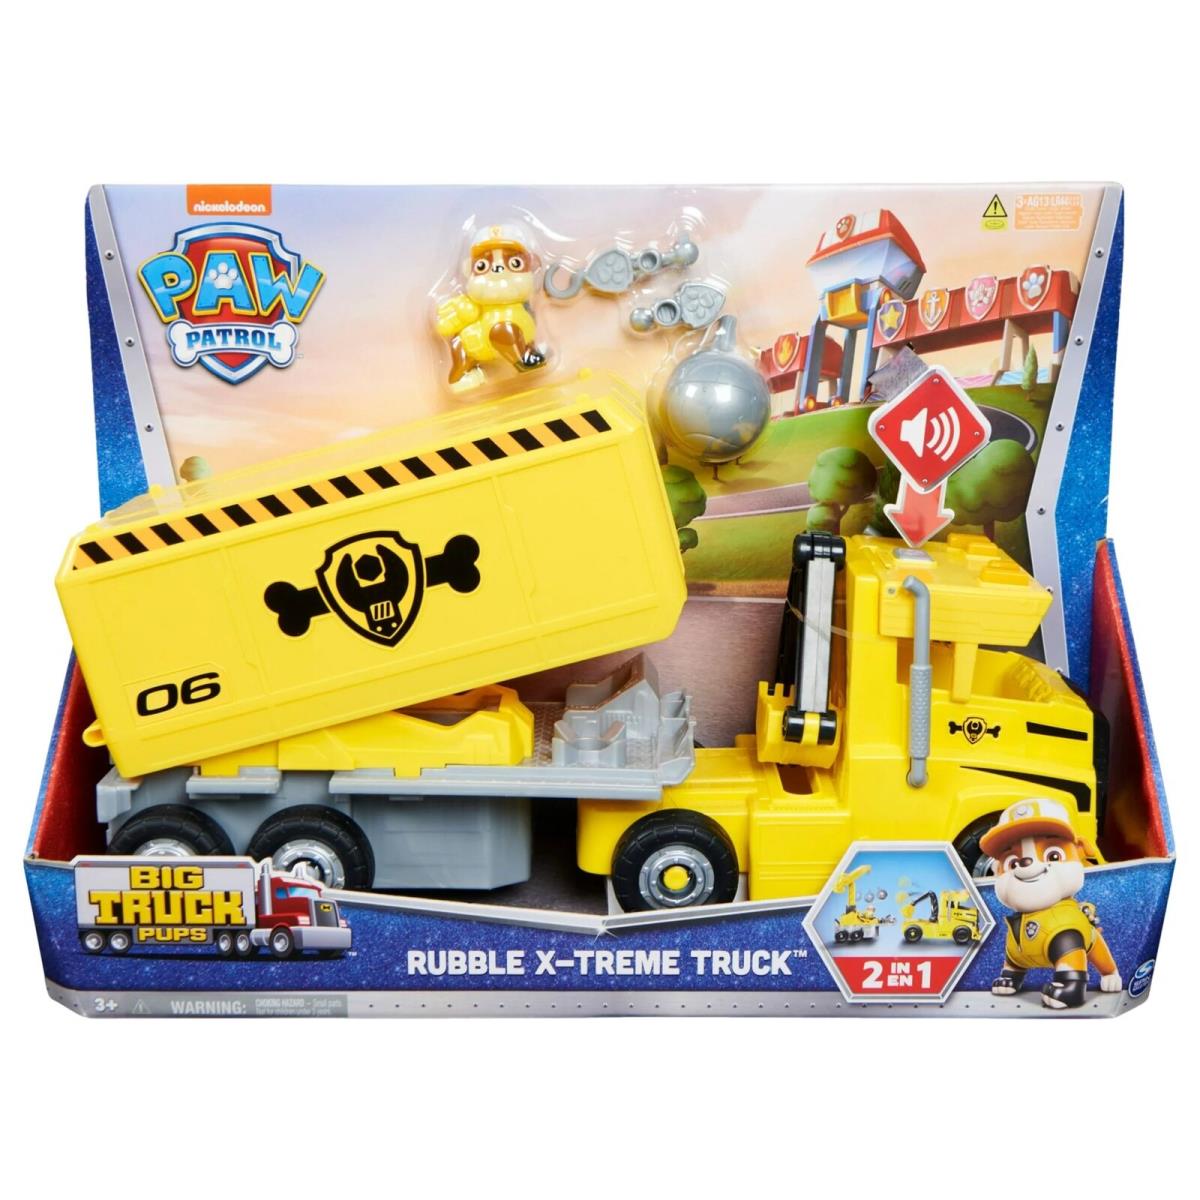 Paw Patrol Rubble 2 in 1 Transforming X-treme Truck Vehicle Figure Playset - Yellow